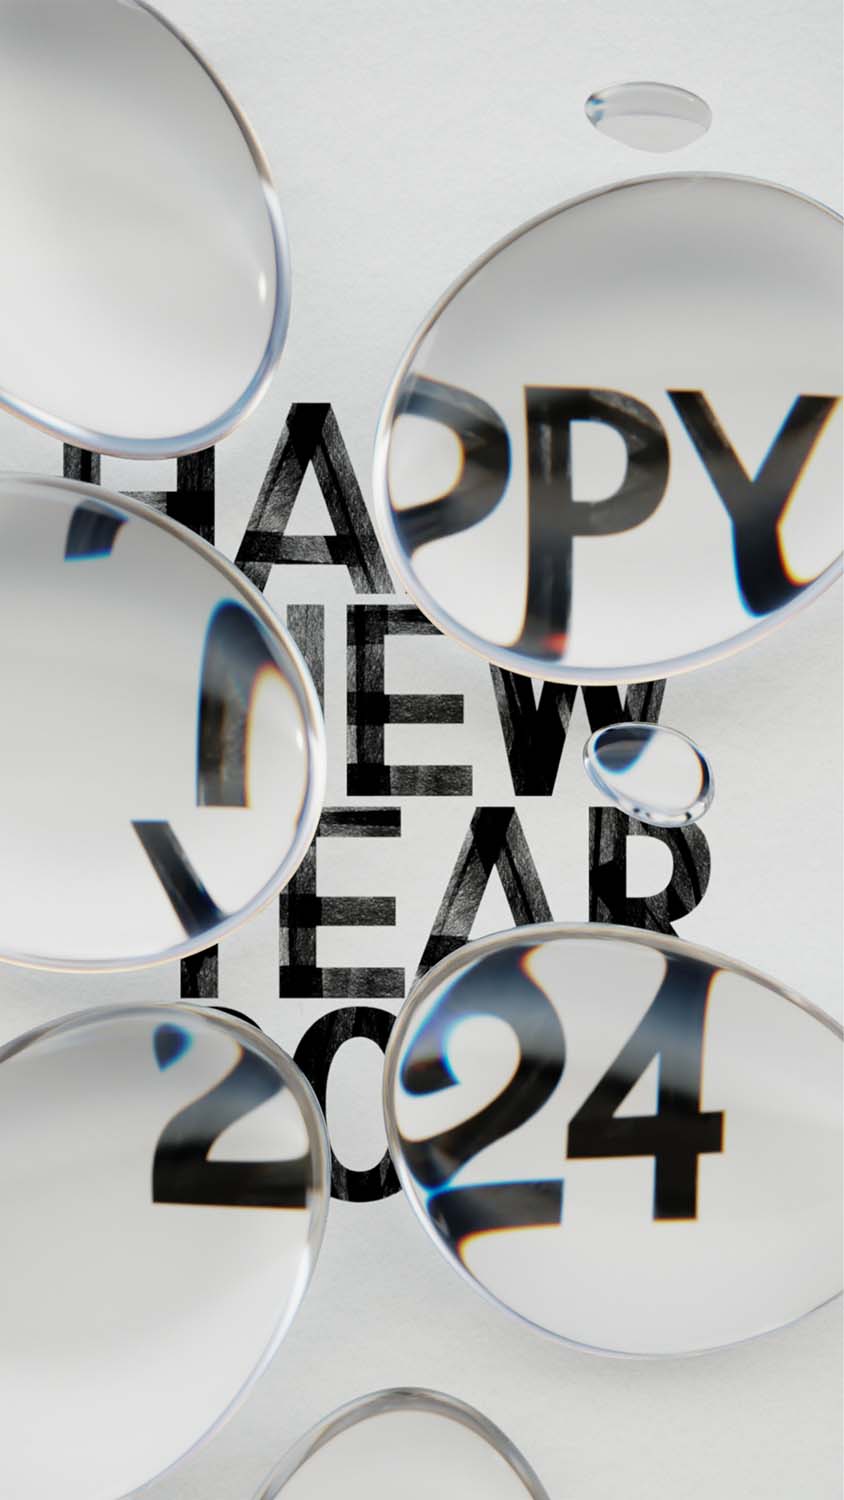 Happy New Year 2024 iPhone Wallpaper